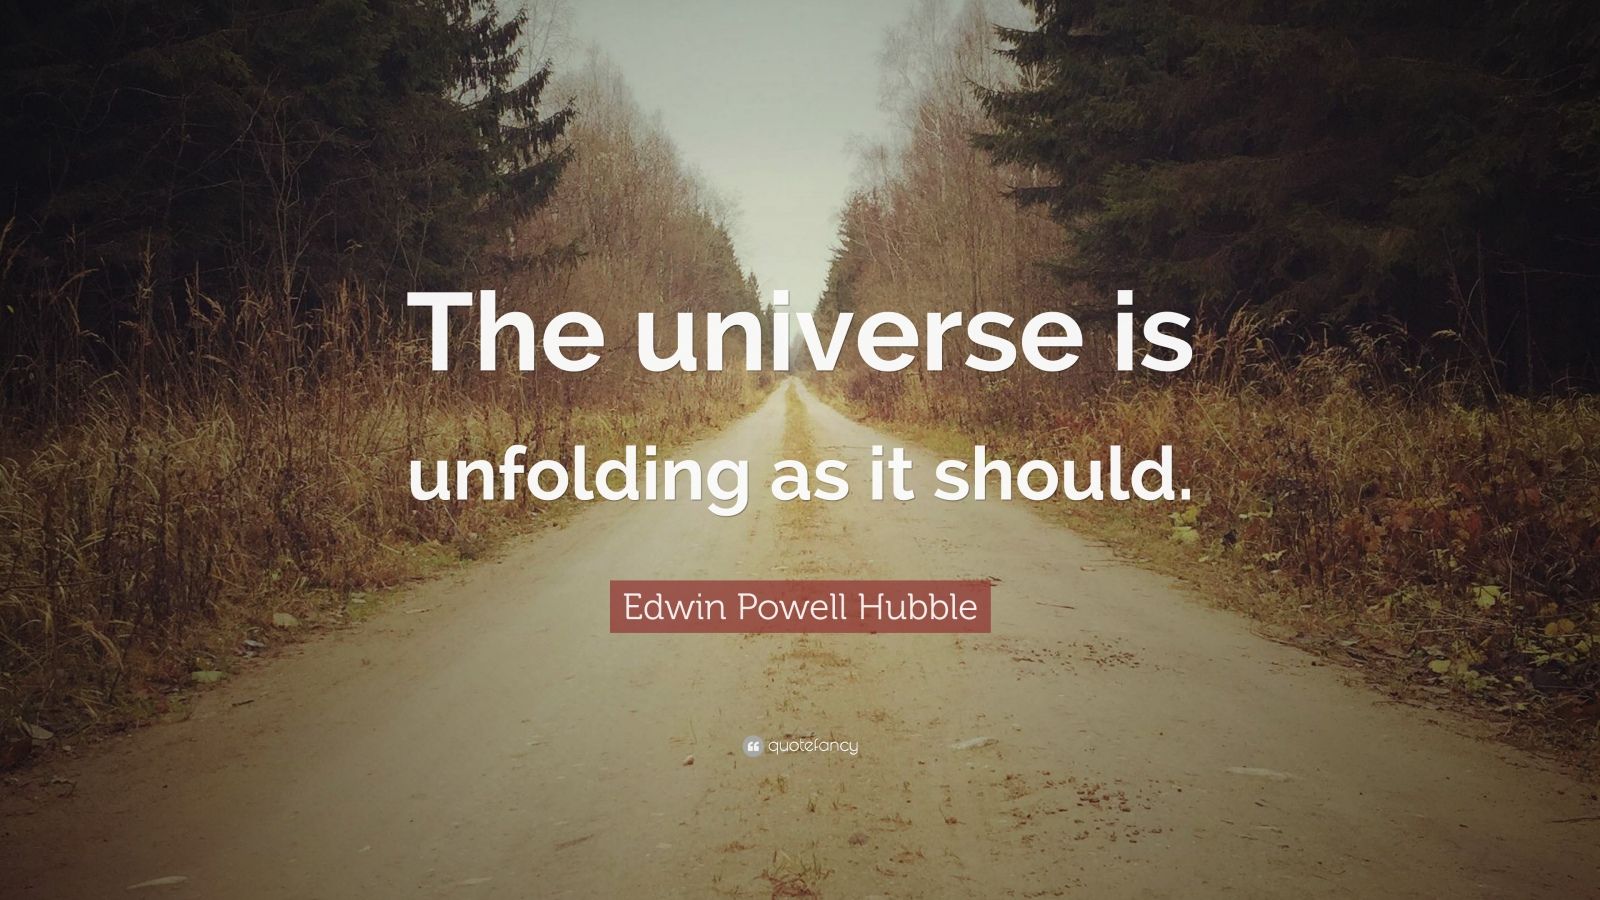 Edwin Powell Hubble Quote: “The universe is unfolding as it should ...